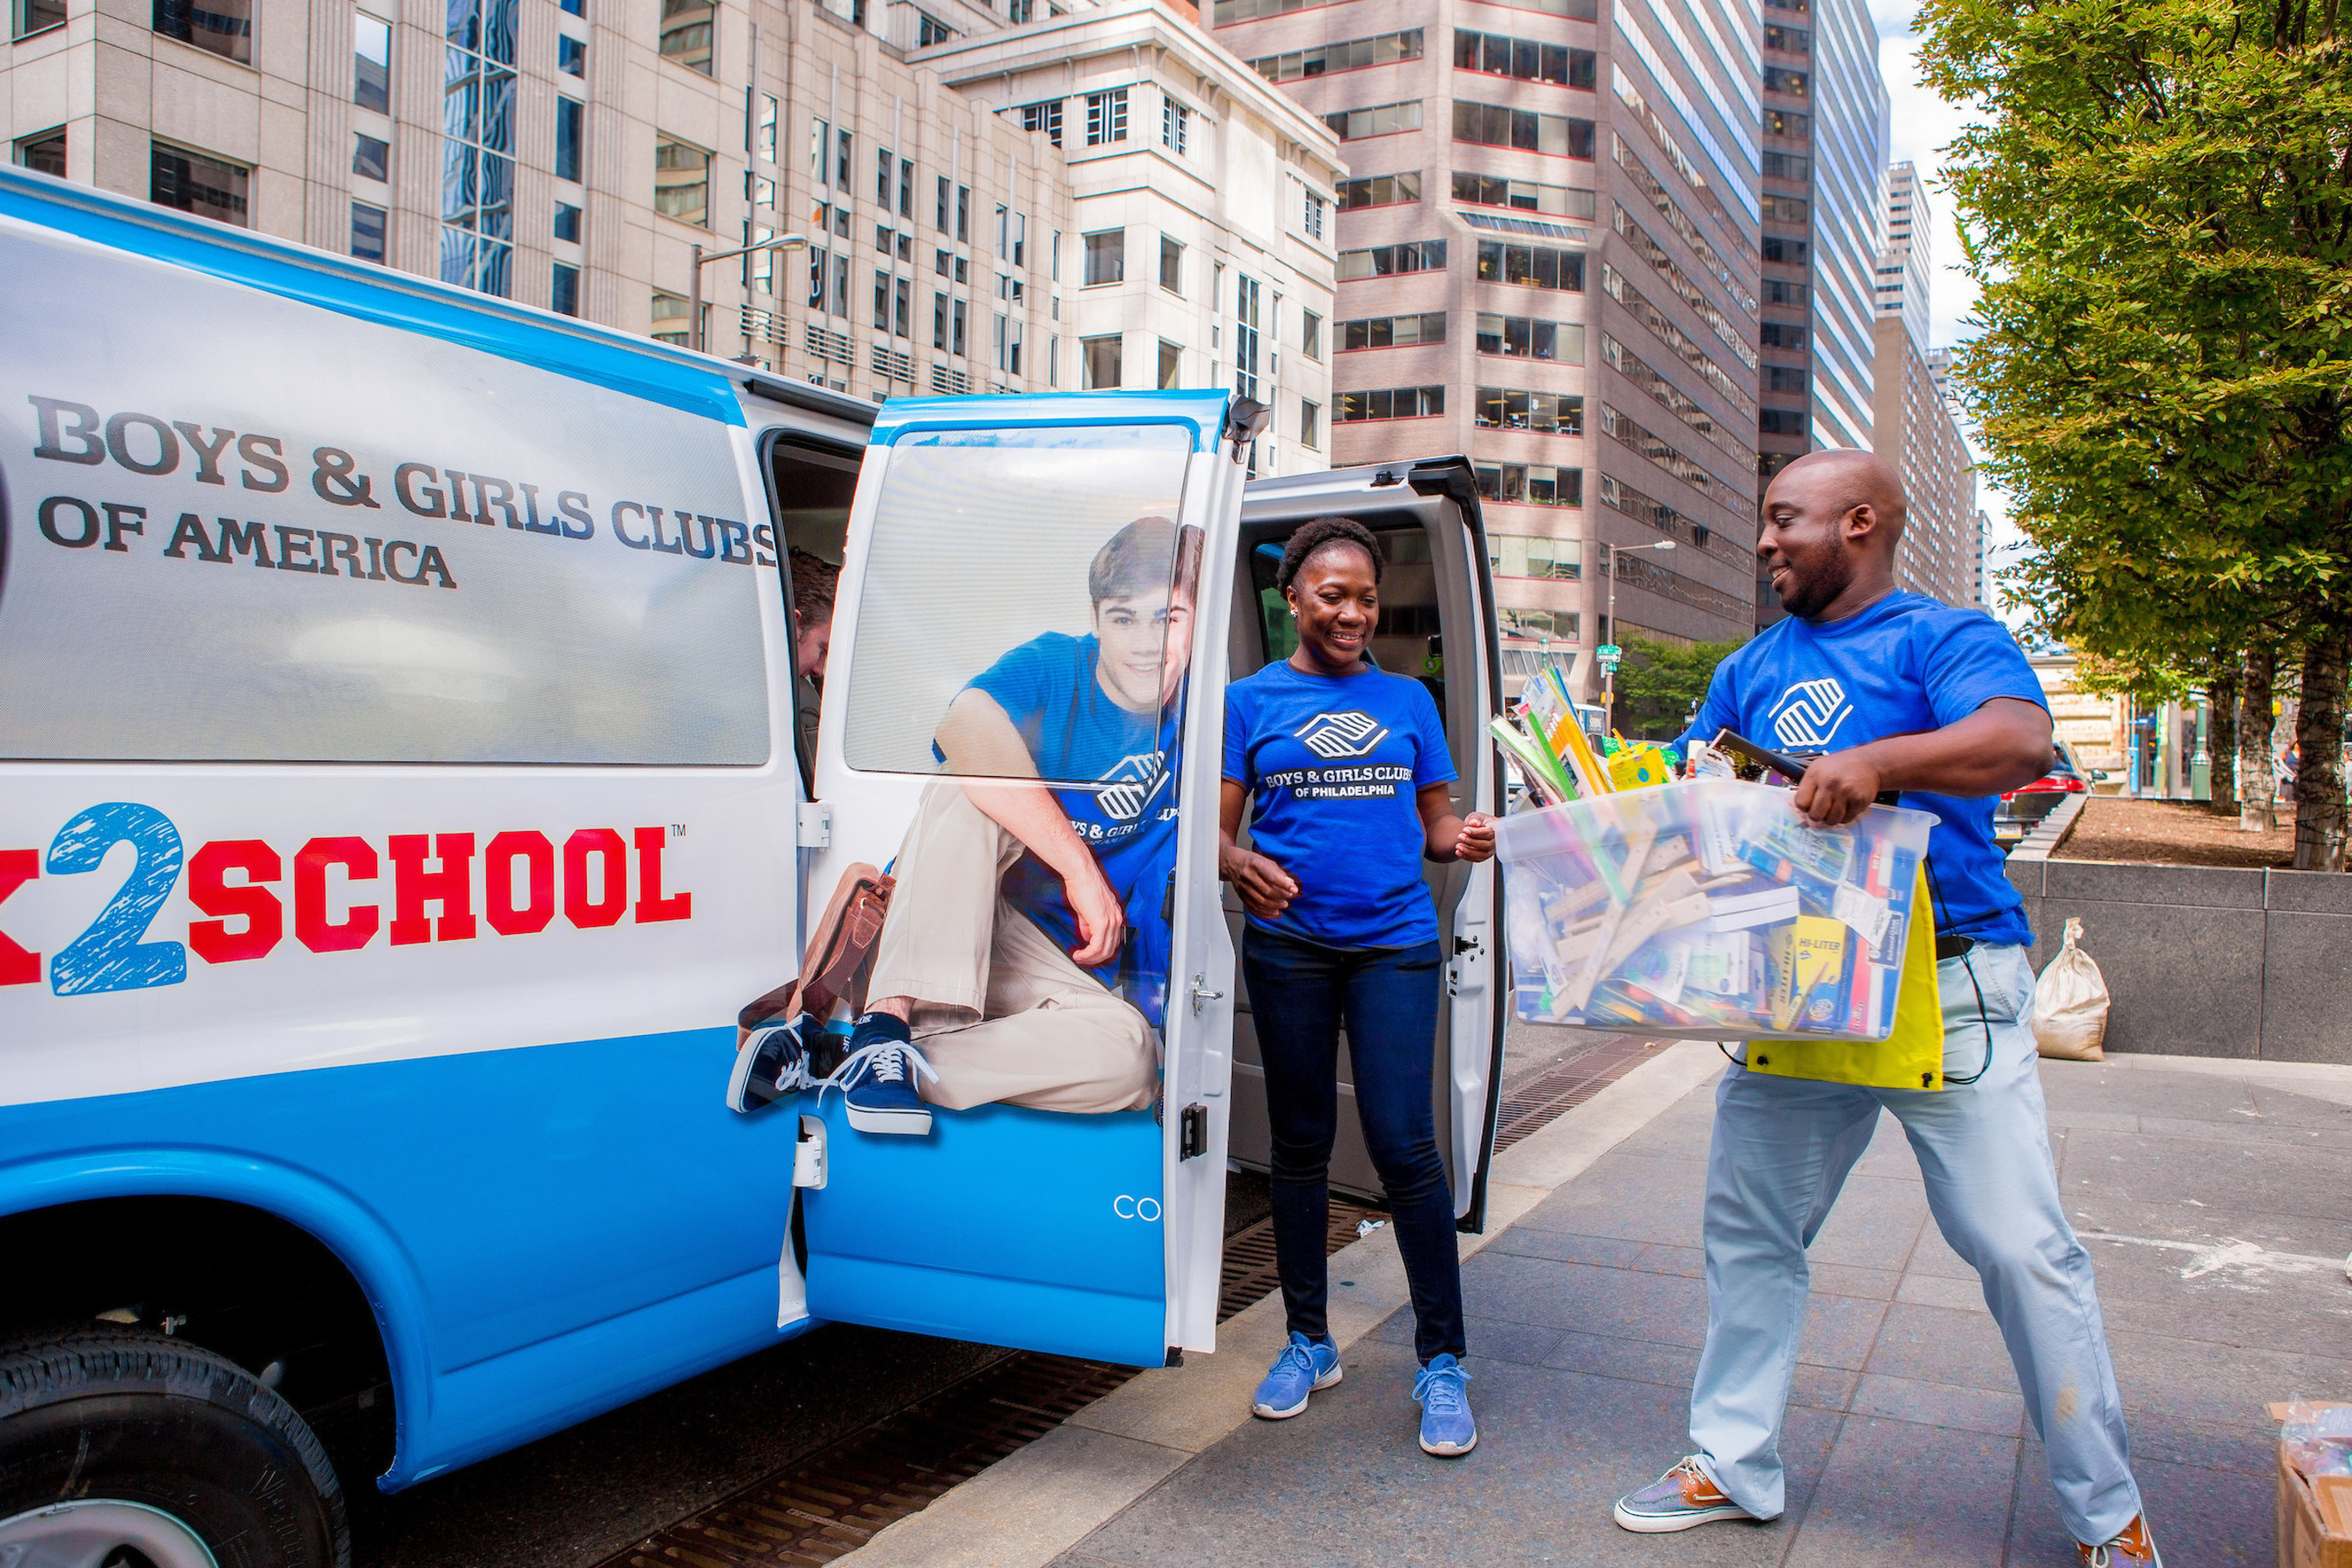 Boys & Girls Clubs of America and Comcast volunteers help Stuff the Bus during the organization's Back2School event.